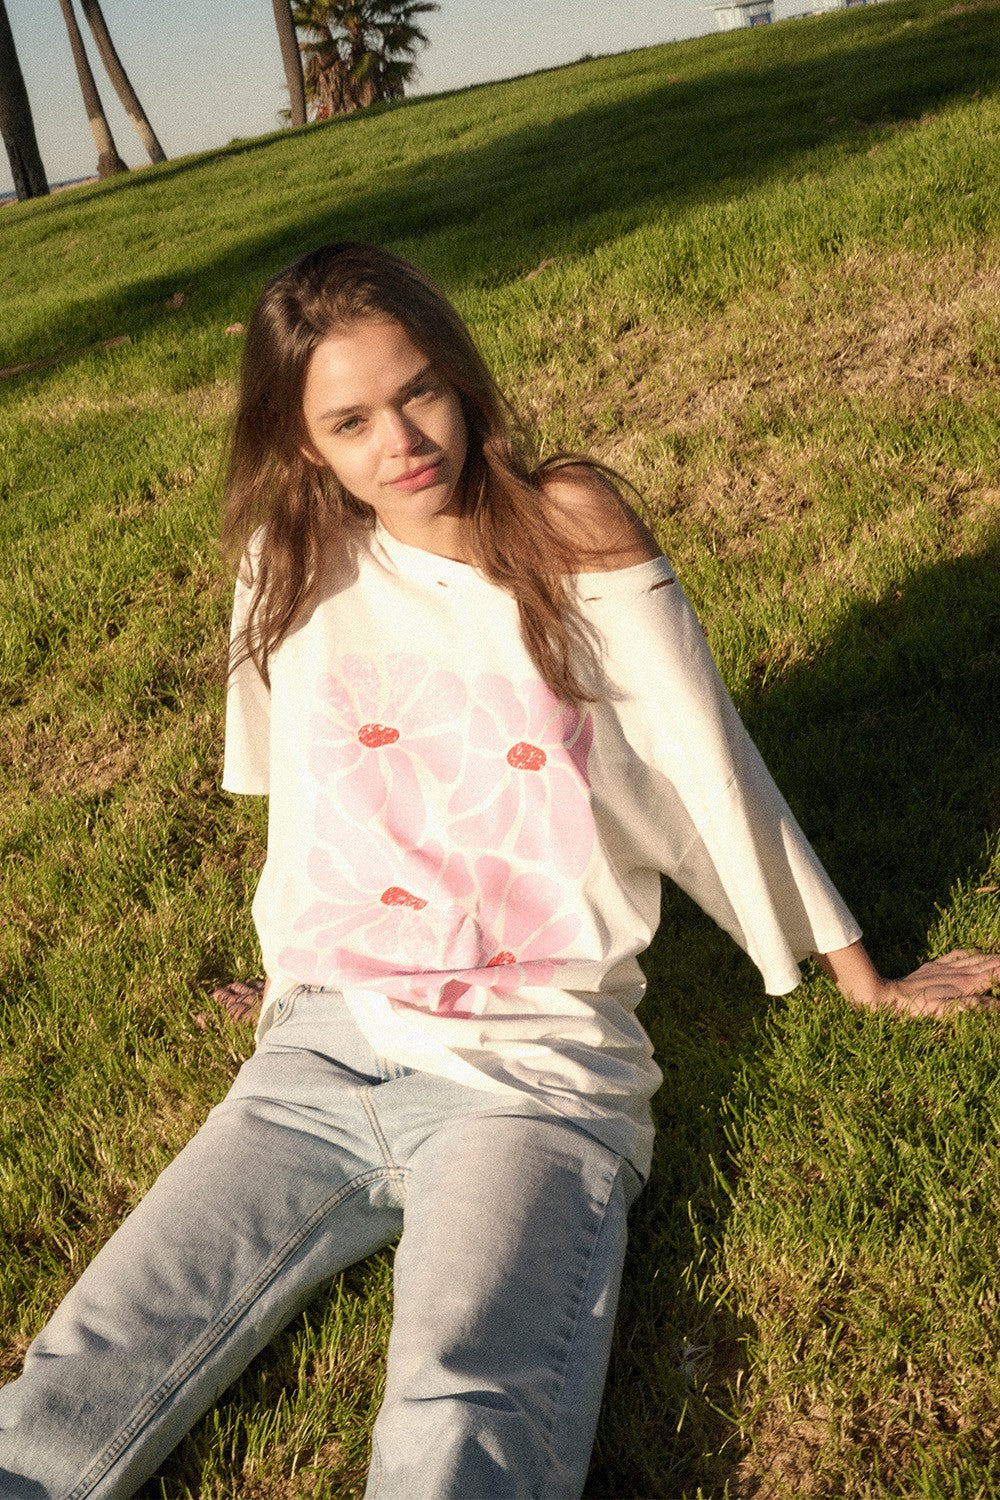 The Distressed Flower Graphic Tee